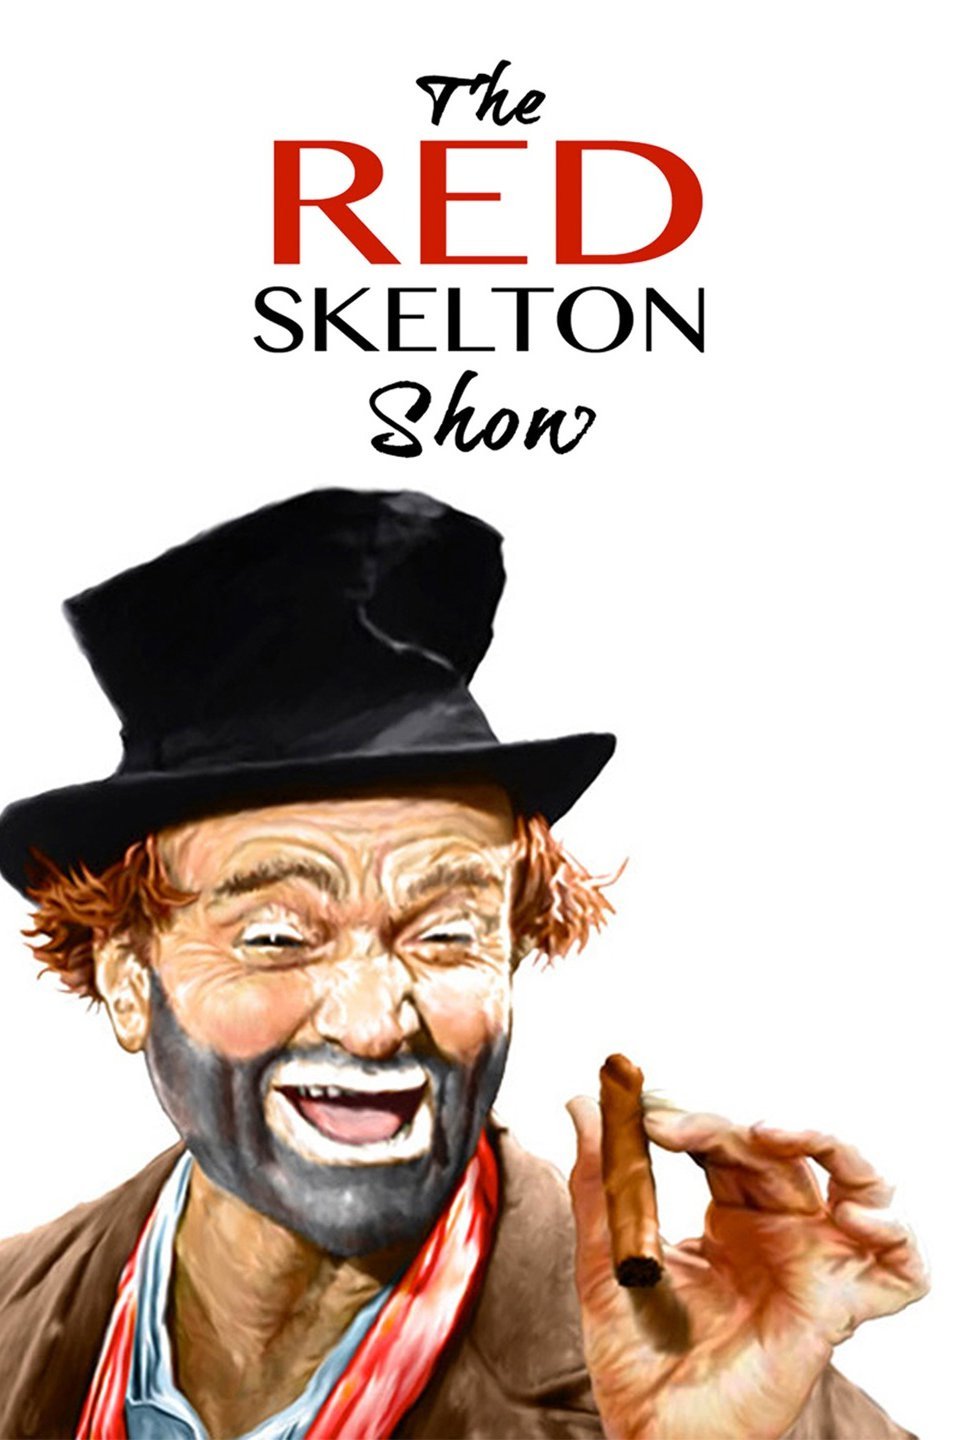 The Red Skelton Tv Show